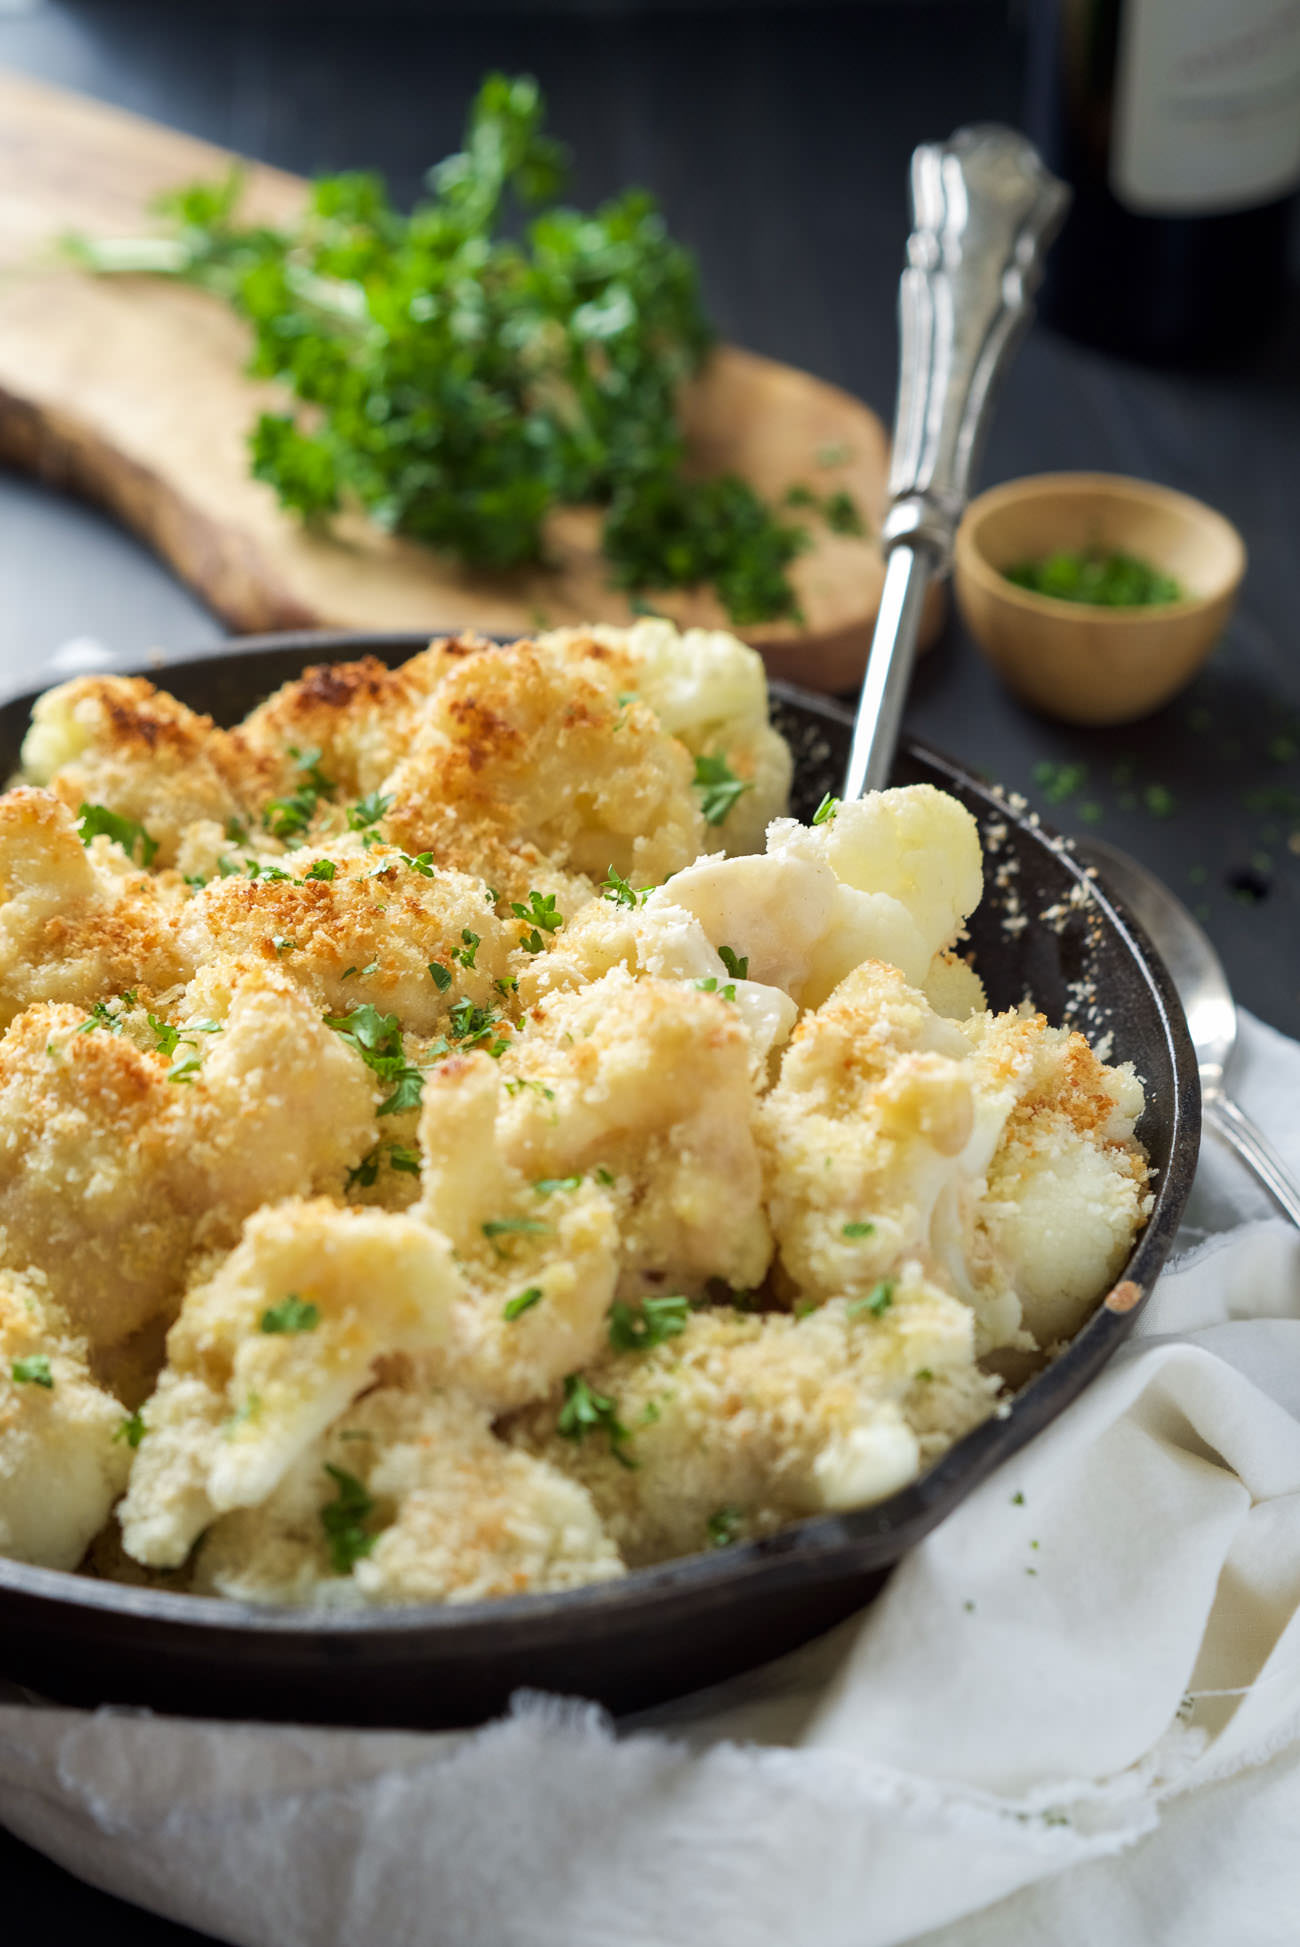 Garlic Gouda & Parmesan Cauliflower Au Gratin is the perfect side dish for your holiday table but easy enough for any weeknight dinner! Tender cauliflower blanketed in a double cheese sauce and crunchy panko topping!